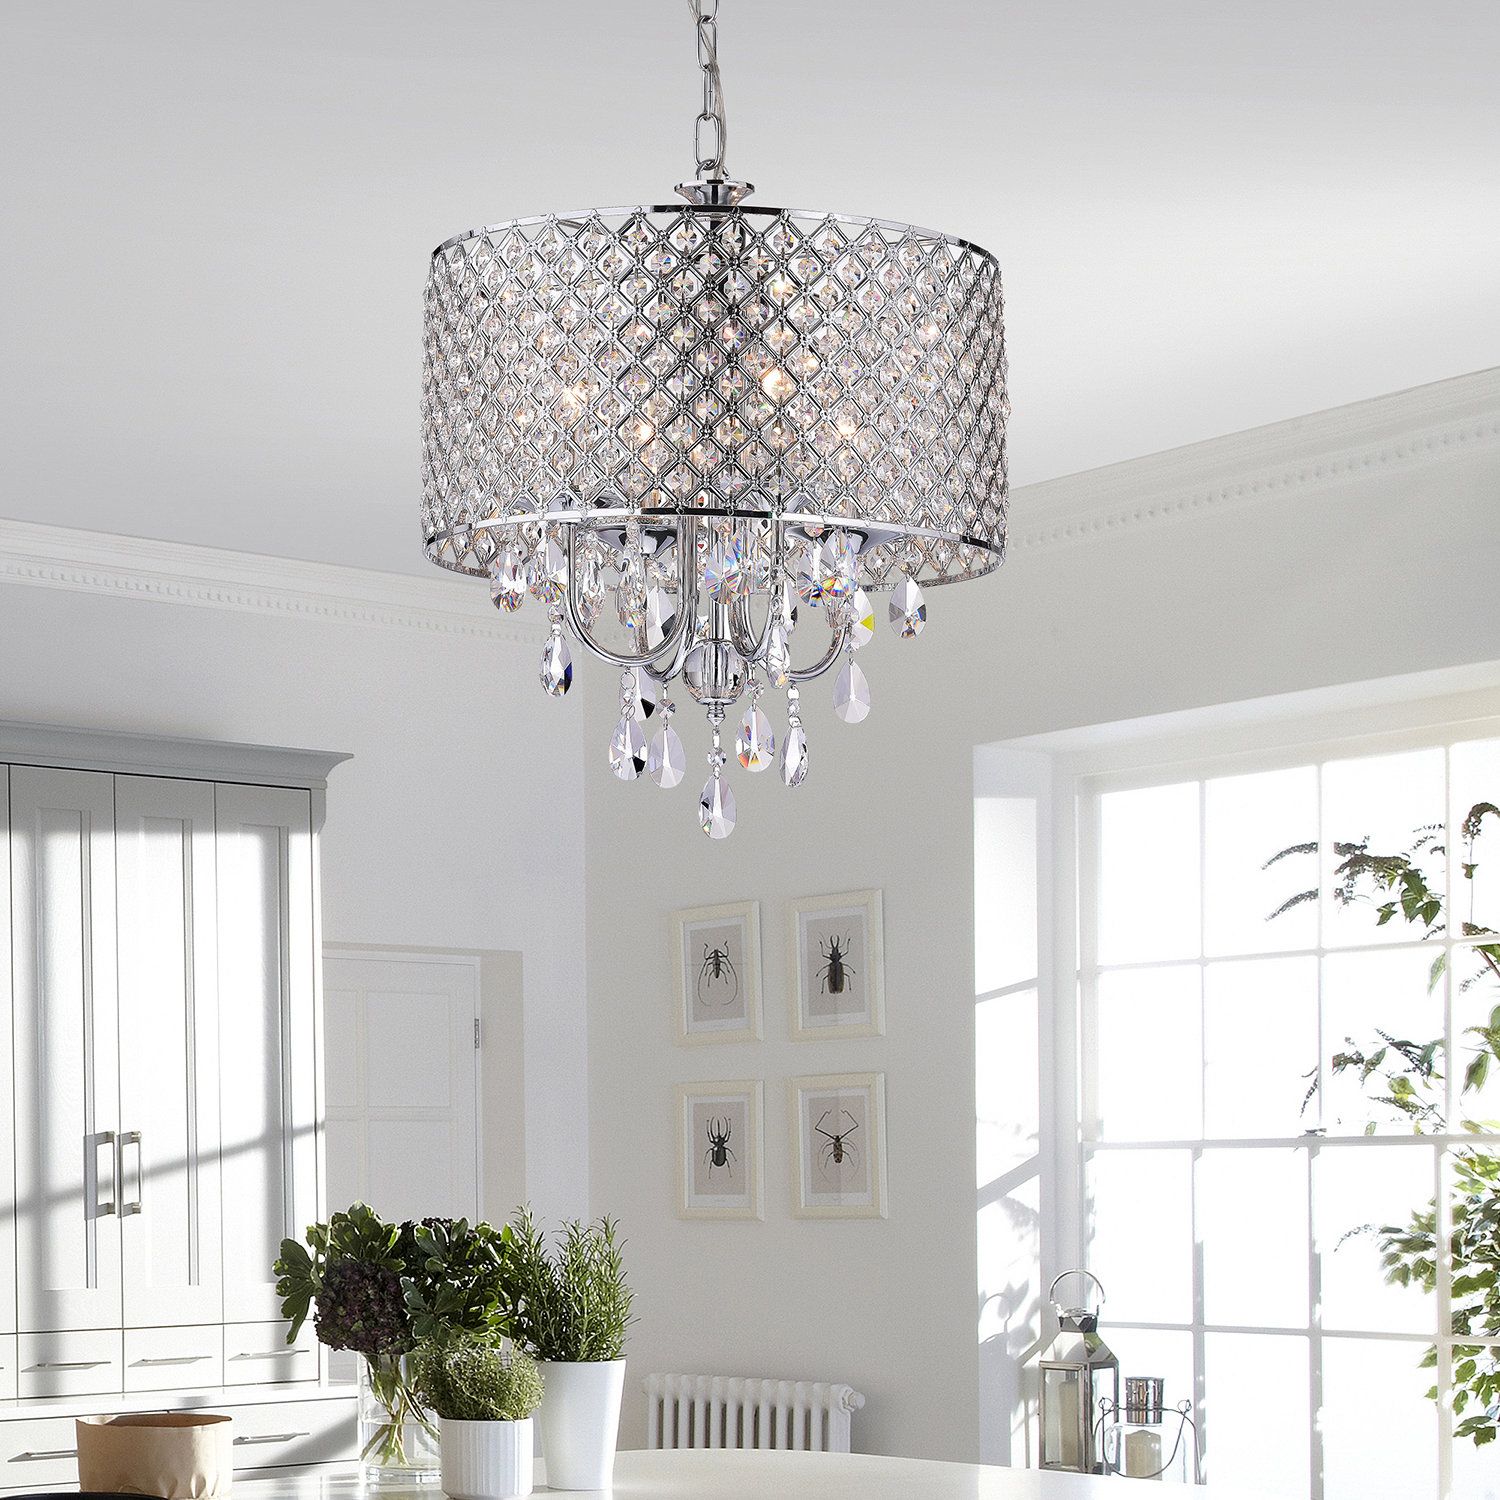 Crystal Calypso Lighting | Wayfair Intended For Whitten 4 Light Crystal Chandeliers (View 12 of 30)